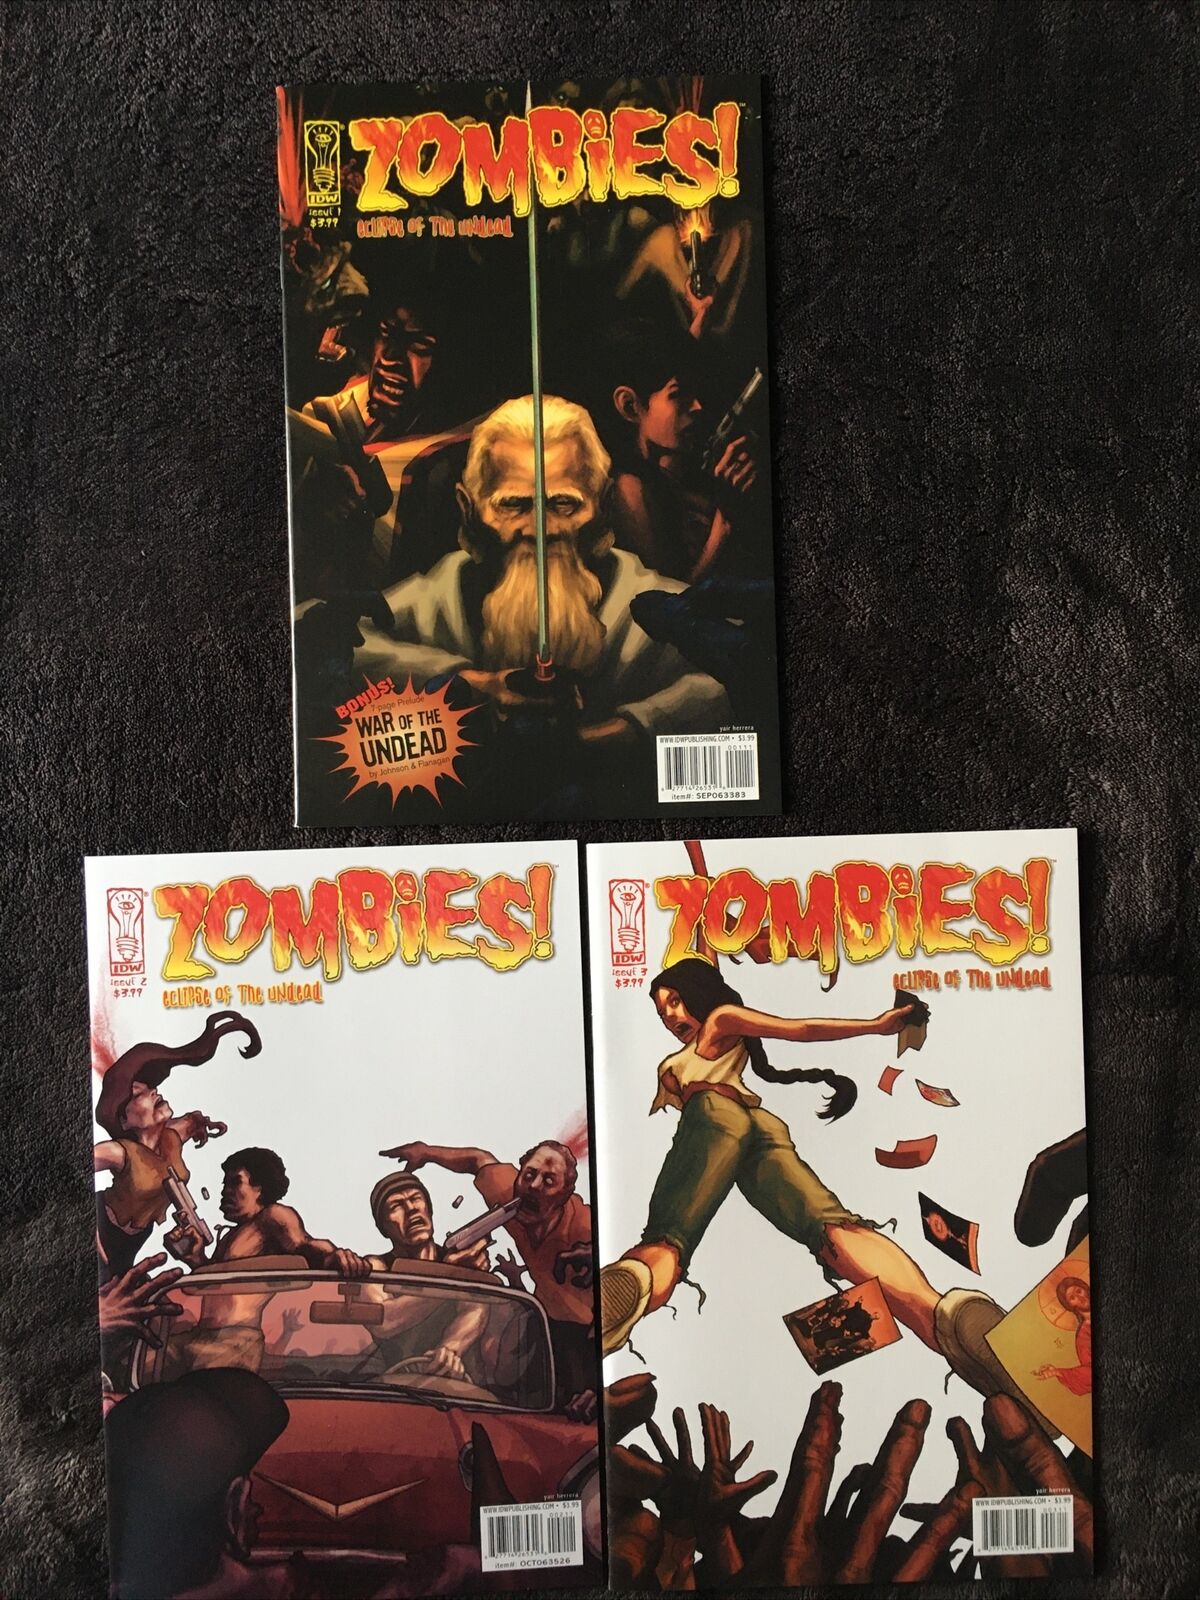 Zombies Eclipse of the Undead Issues # 1-3 series Excellent Condition    #A76